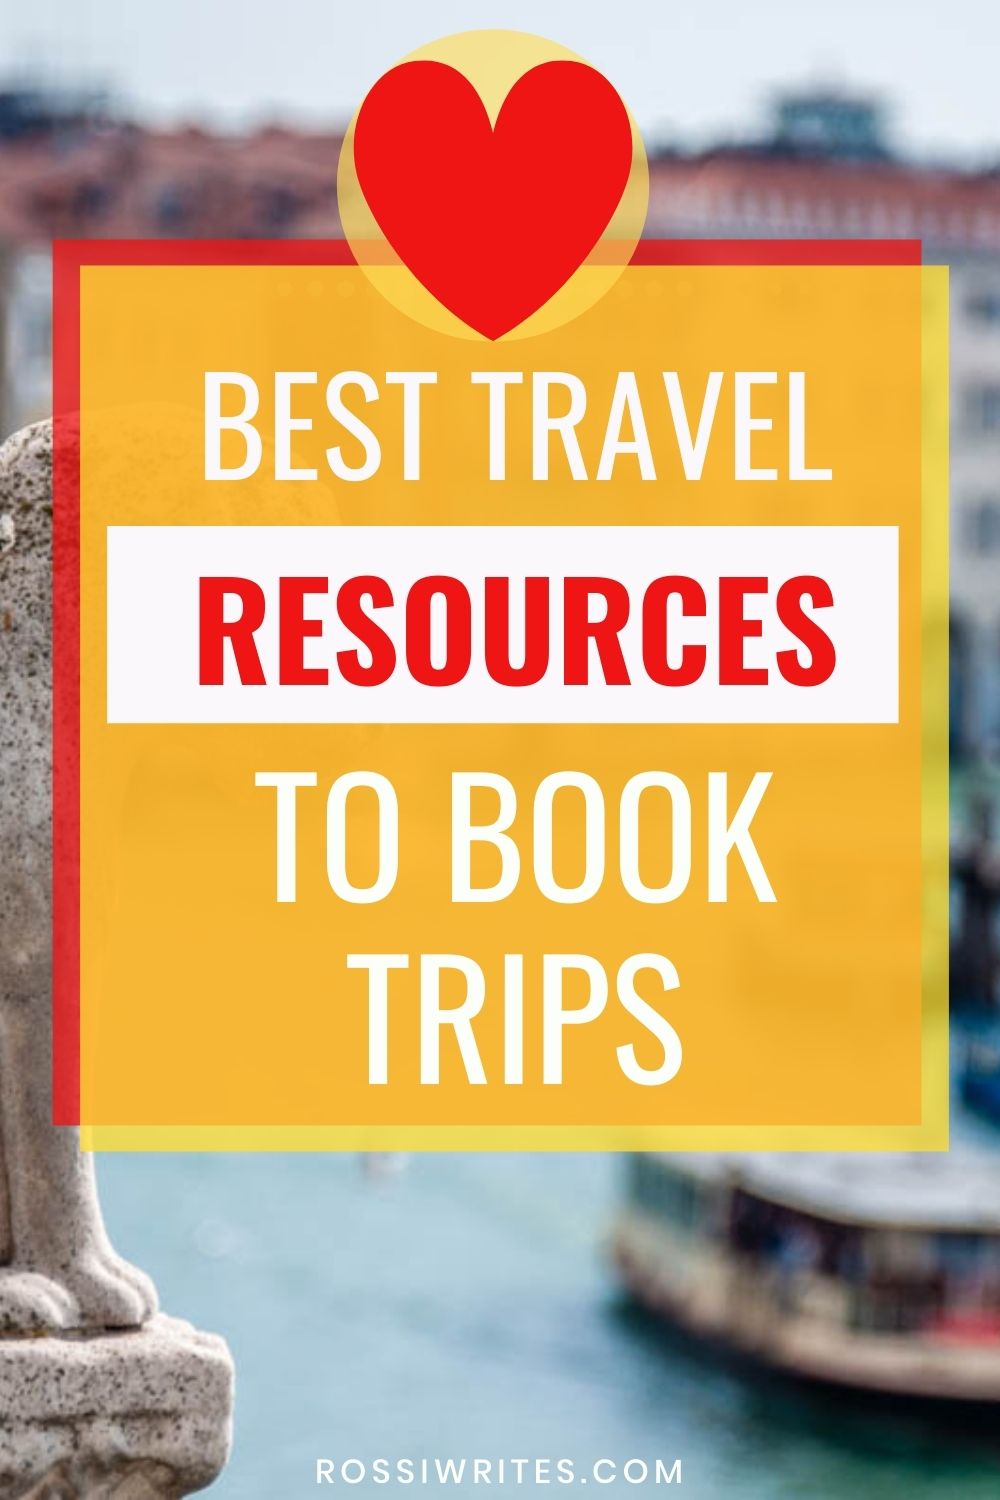 Best Travel Resources and Sites to Book Trips - rossiwrites.com